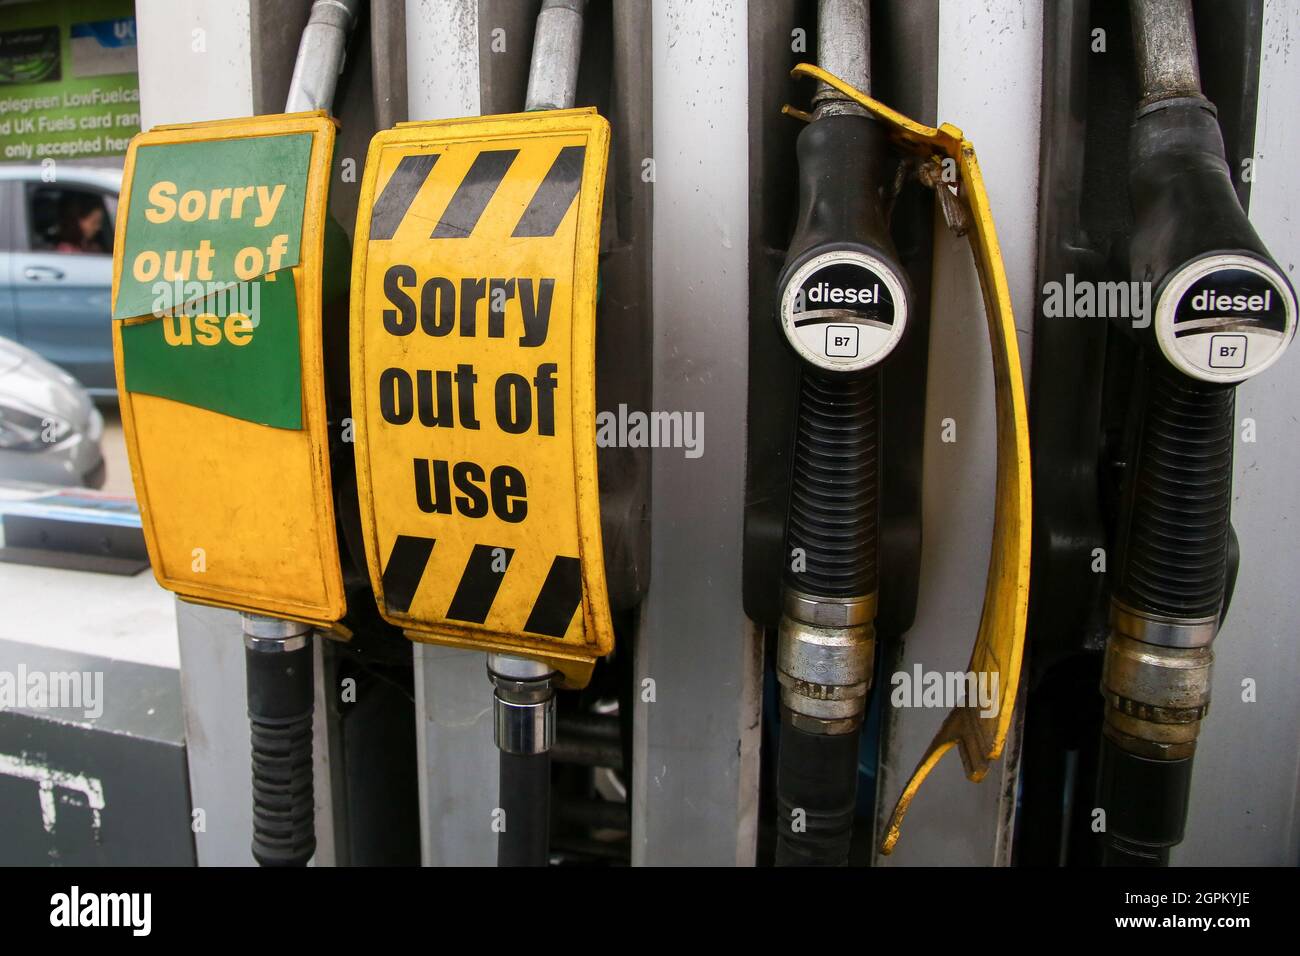 London, UK. 25th Sep, 2021. A 'sorry out of use' sign at a petrol station as motorists continue to panic buying fuel, amid fears of fuel running out due to a shortage of HGV (Heavy Goods Vehicle) drivers. (Photo by Dinendra Haria/SOPA Images/Sipa USA) Credit: Sipa USA/Alamy Live News Stock Photo